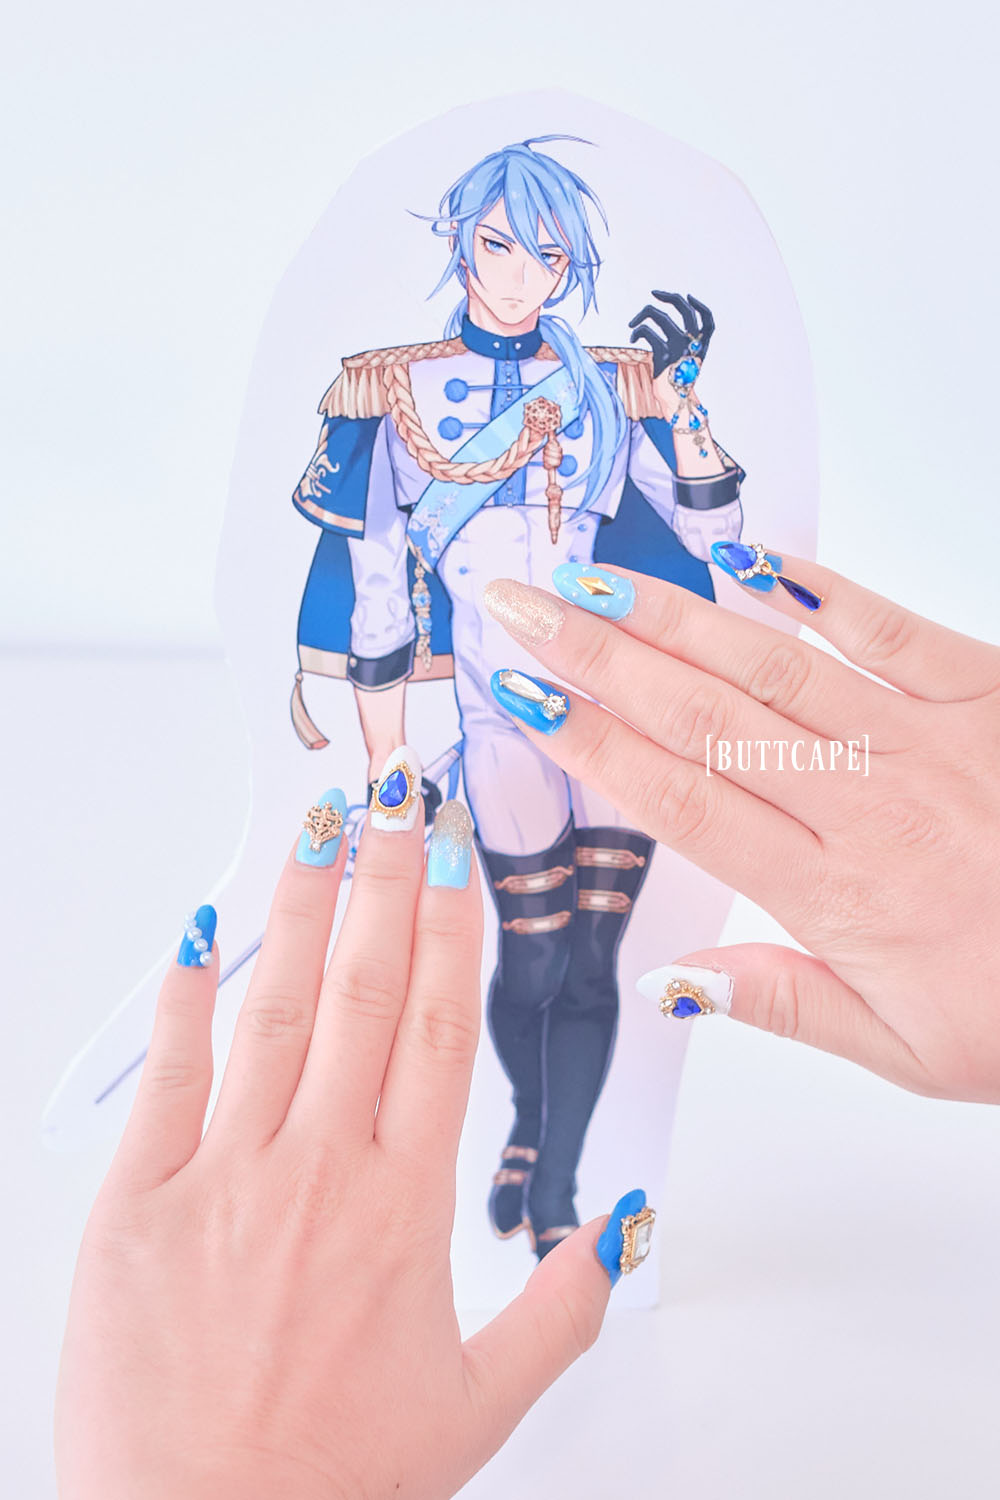 Blue, light blue, white, and gold nail set inspired by Edmond from Nu:Carnival.